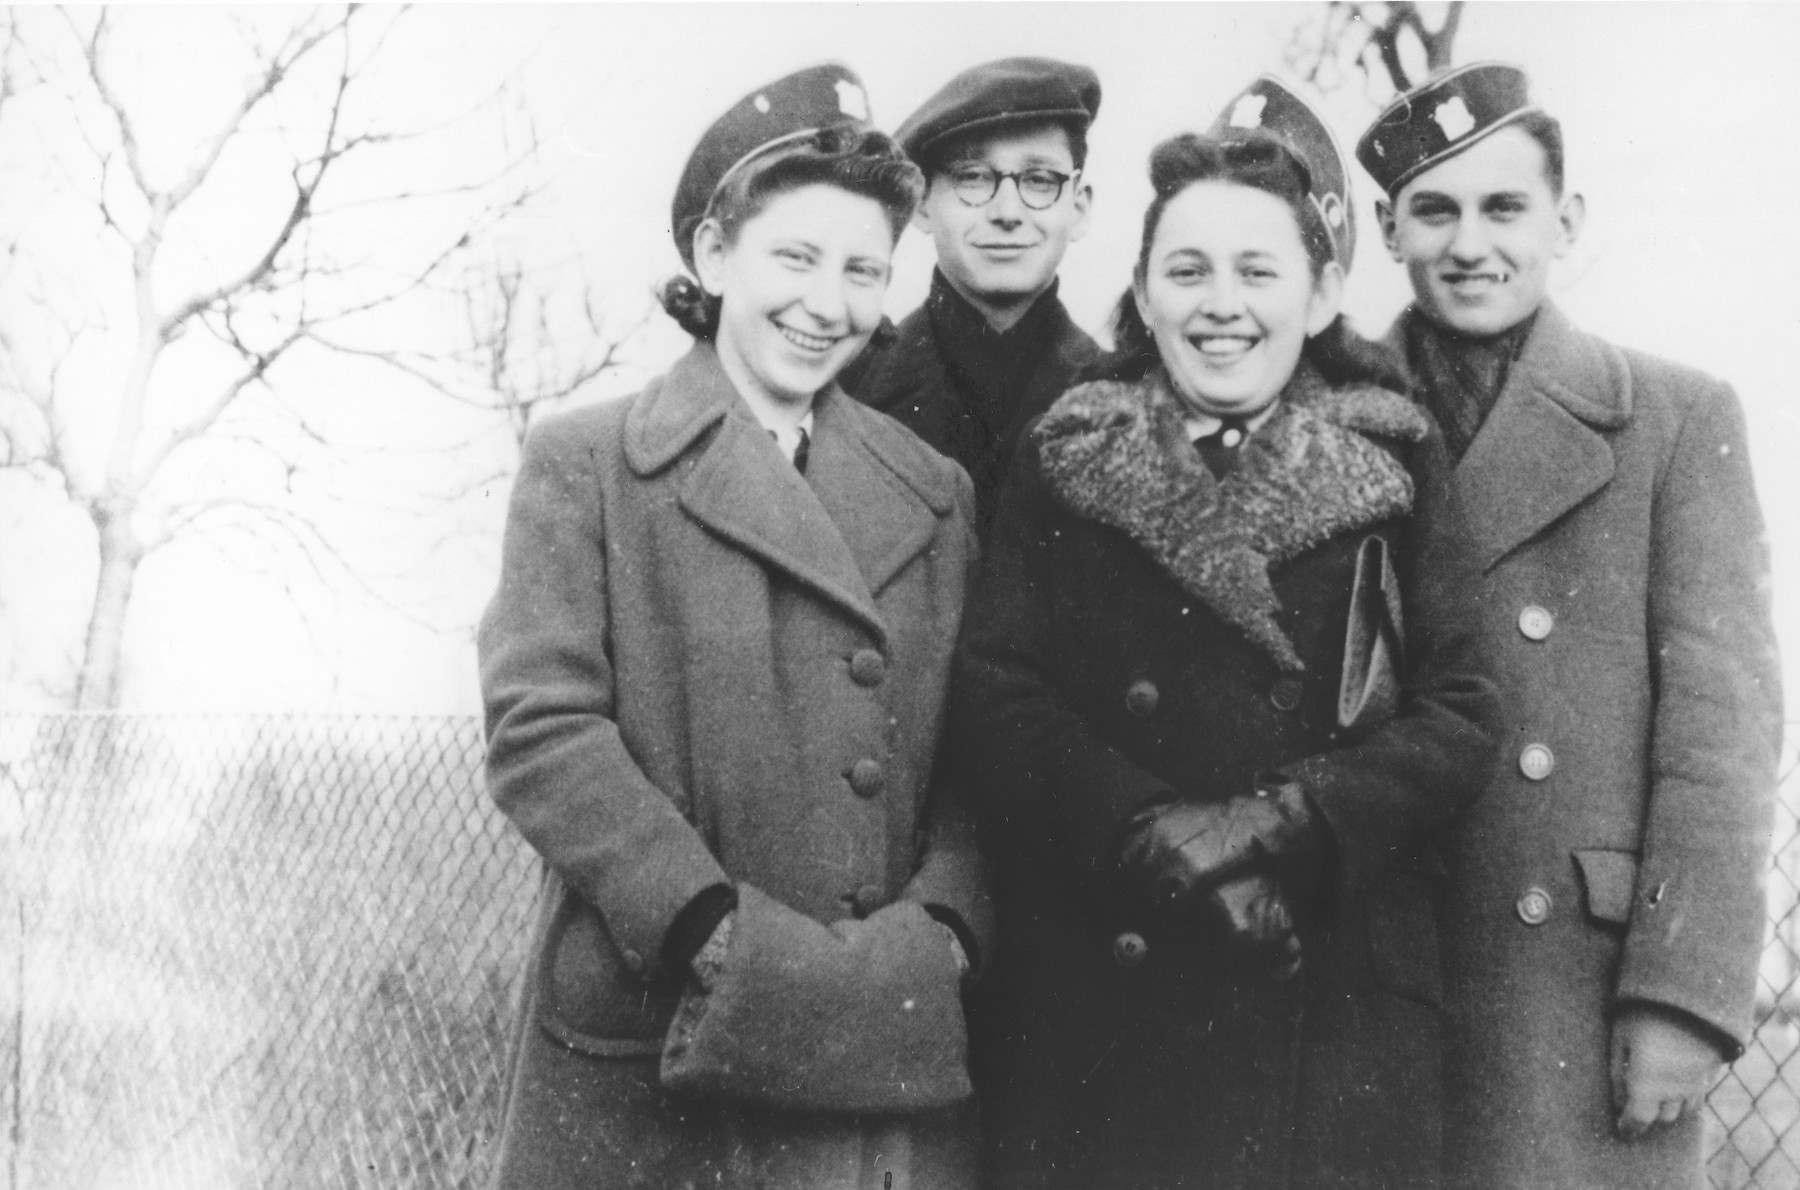 Four students from the Hebrew gymnasium in Mukachevo pose wearing their school caps.

Pictured from left to right are: Miriam Katz, Eva Braun and Bela Grunbaum.